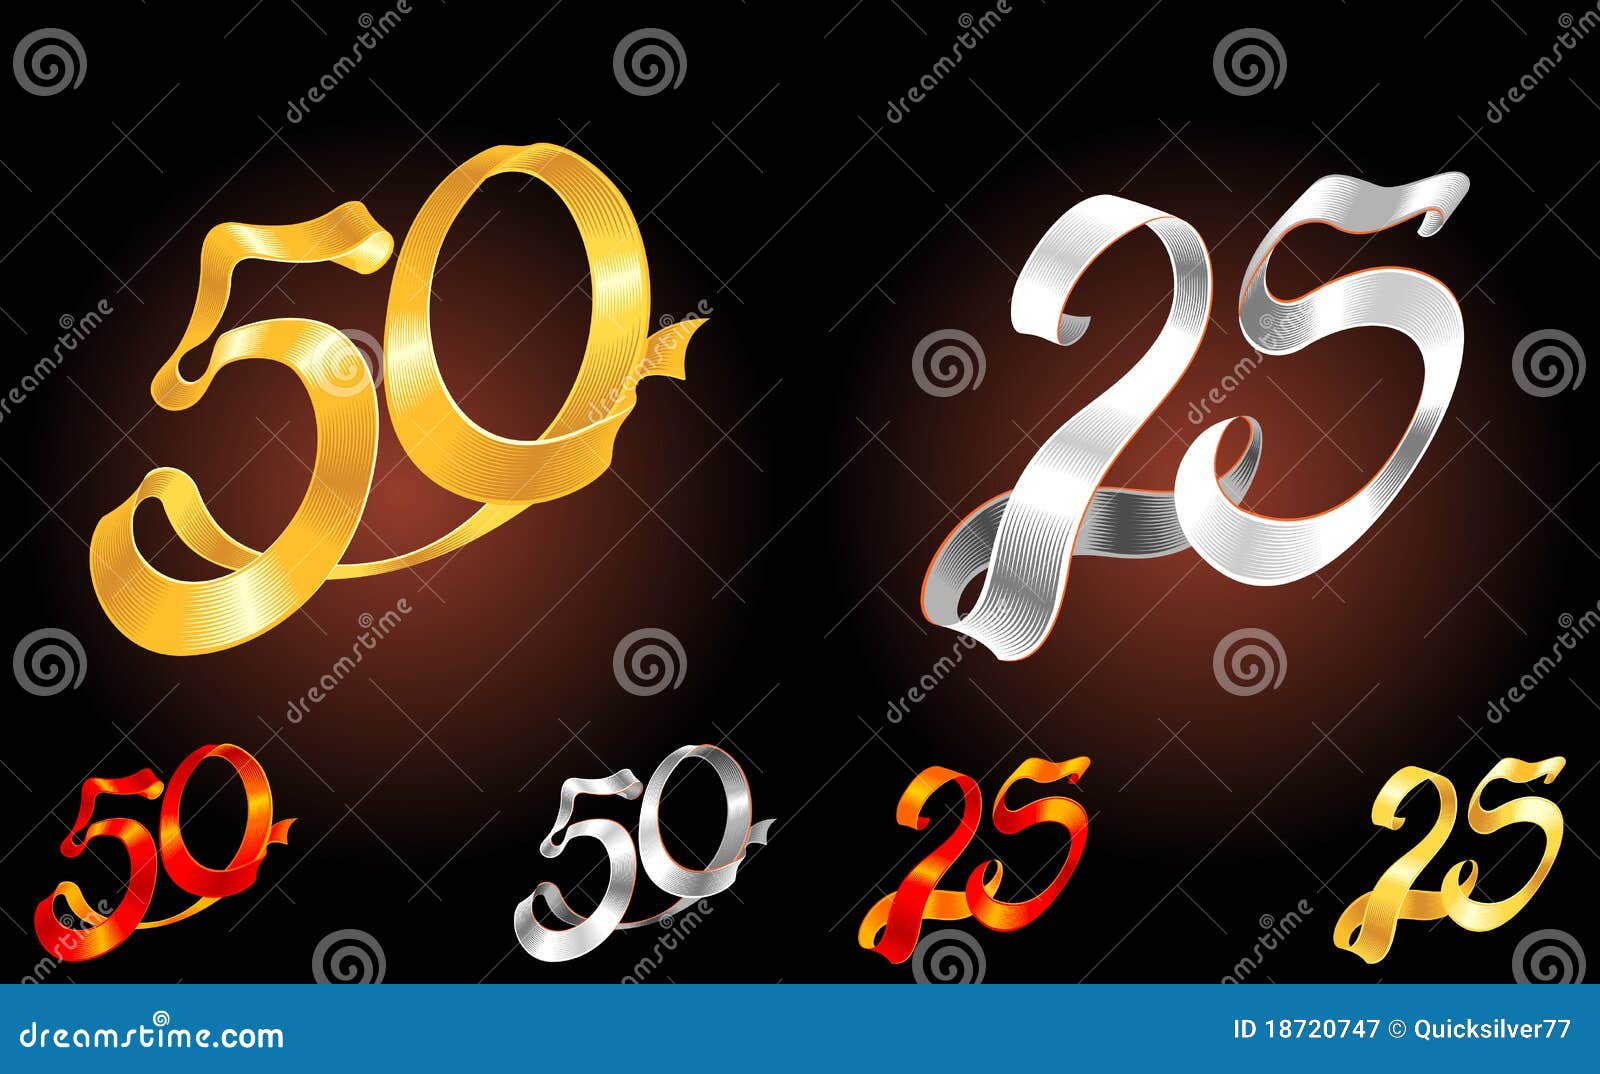 Gold And Silver Ribbon Anniversary Royalty Free Stock Photography - Image: 18720747